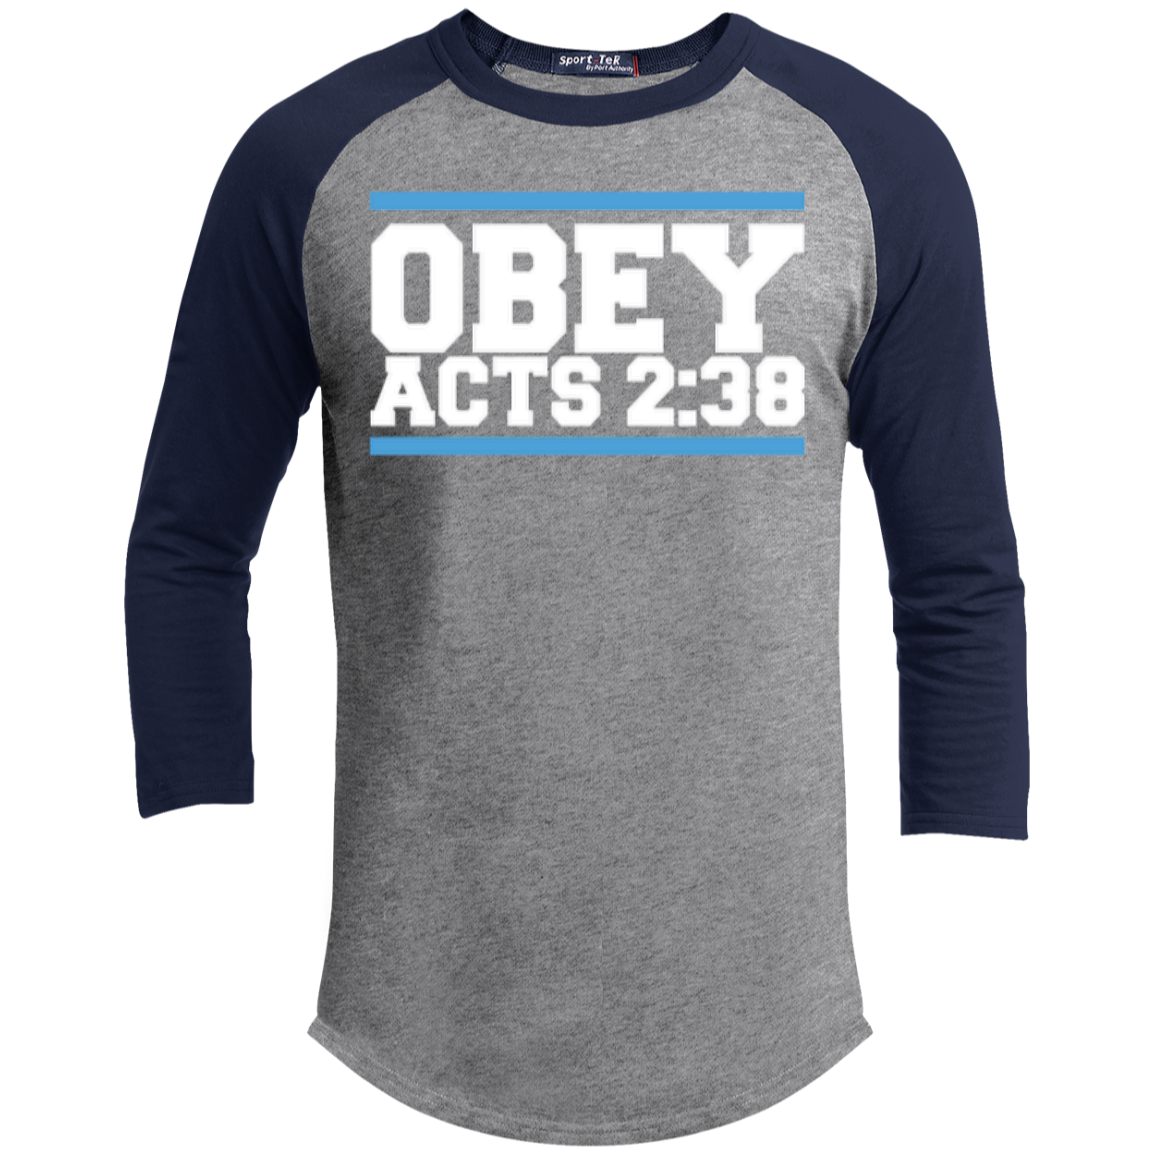 Obey Acts 2:38 - Sporty 3/4 Length Tee Shirt - Kick Merch - 3